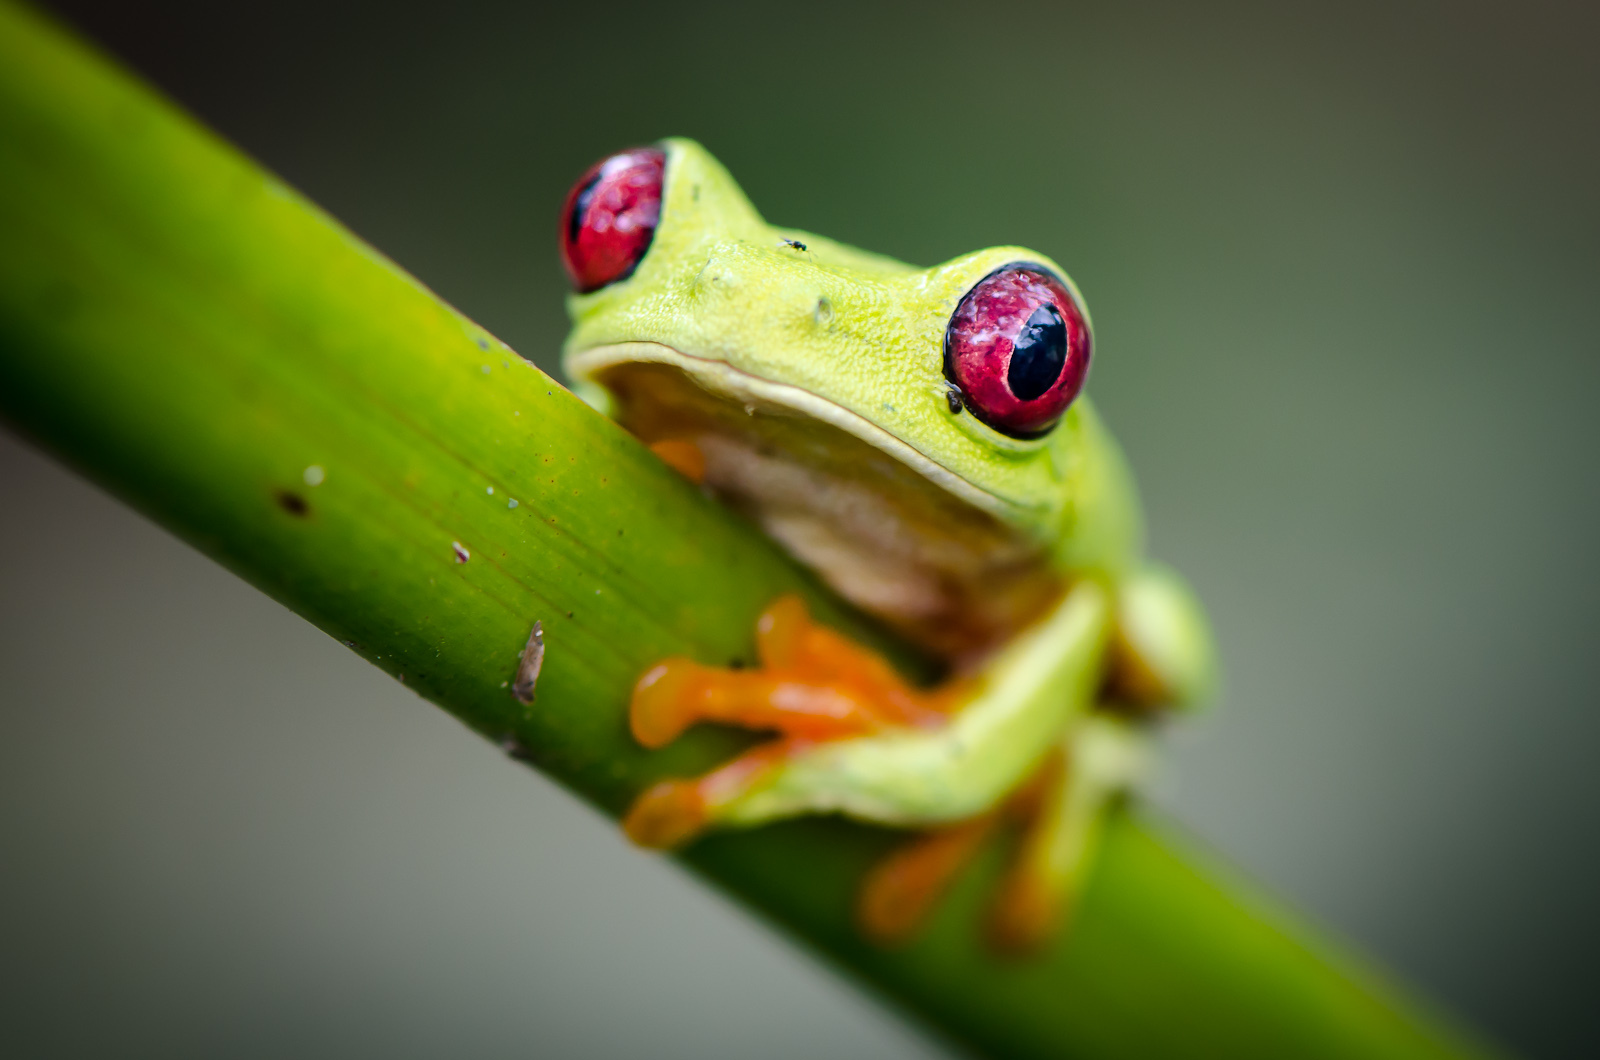 Image of a green tree frog with red eyes